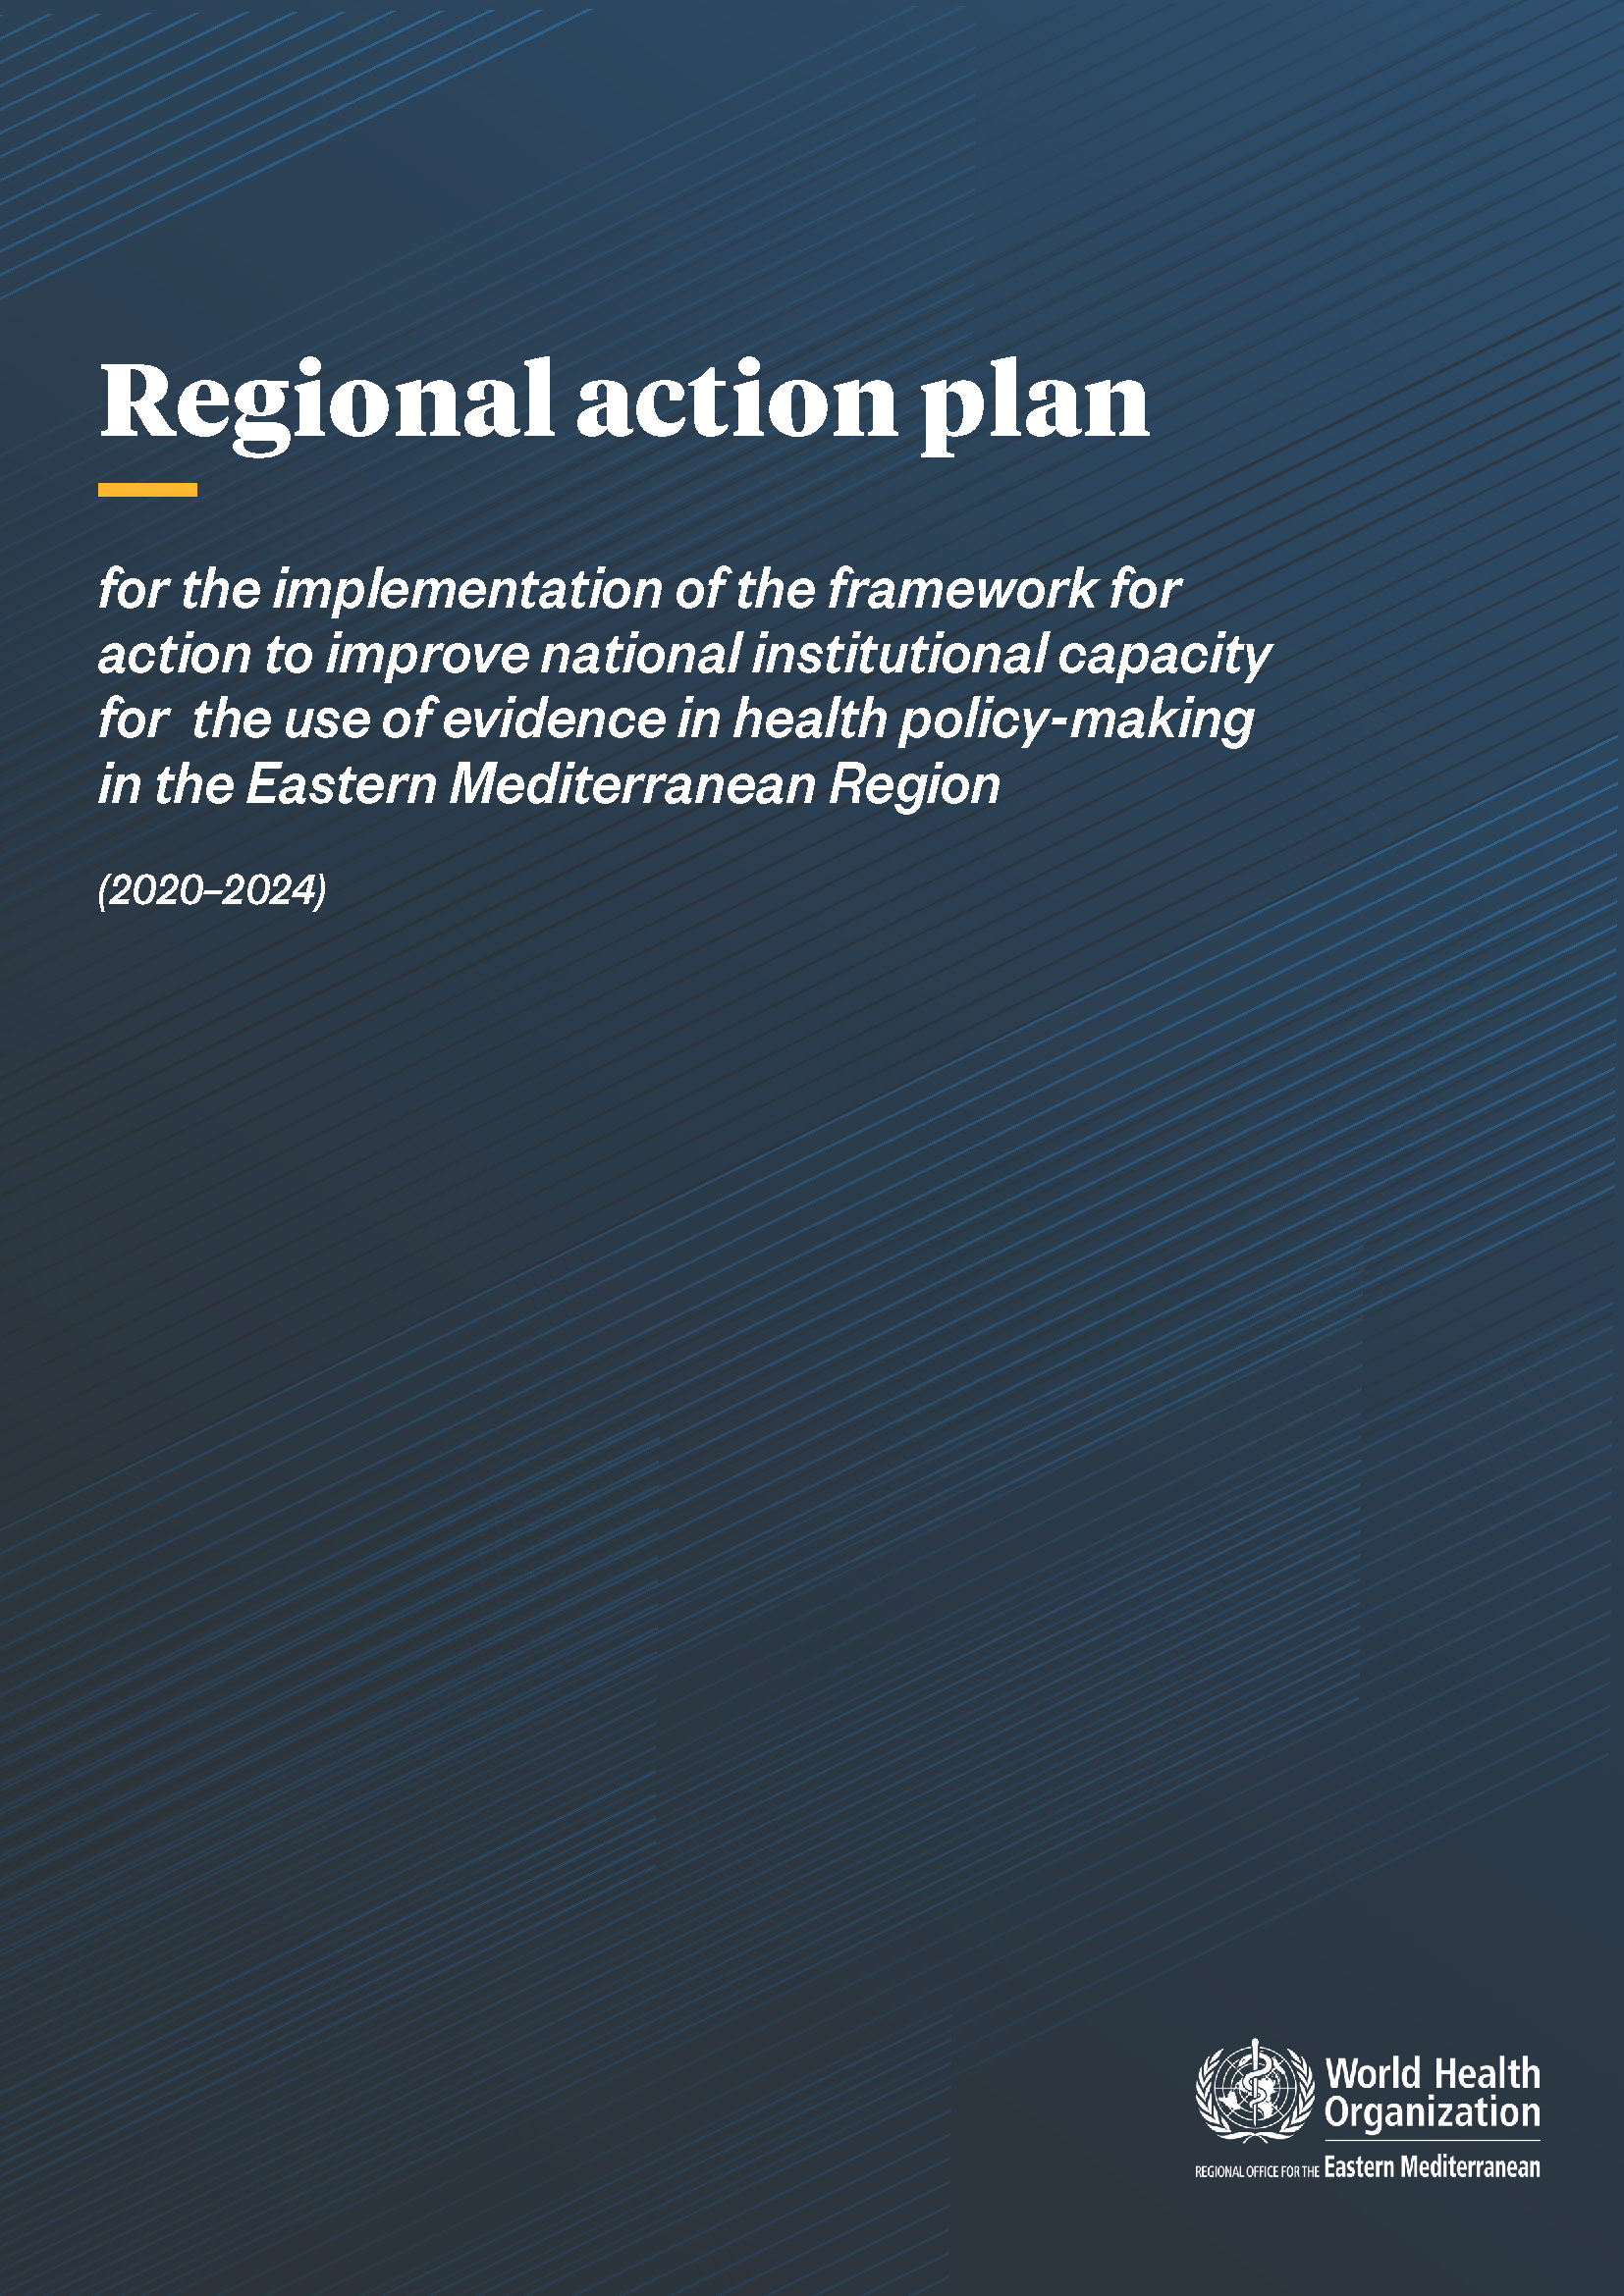 Regional action plan for the implementation of the framework for action to improve national institutional capacity for the use of evidence in health policy-making in the Eastern Mediterranean Region (2020–2024)